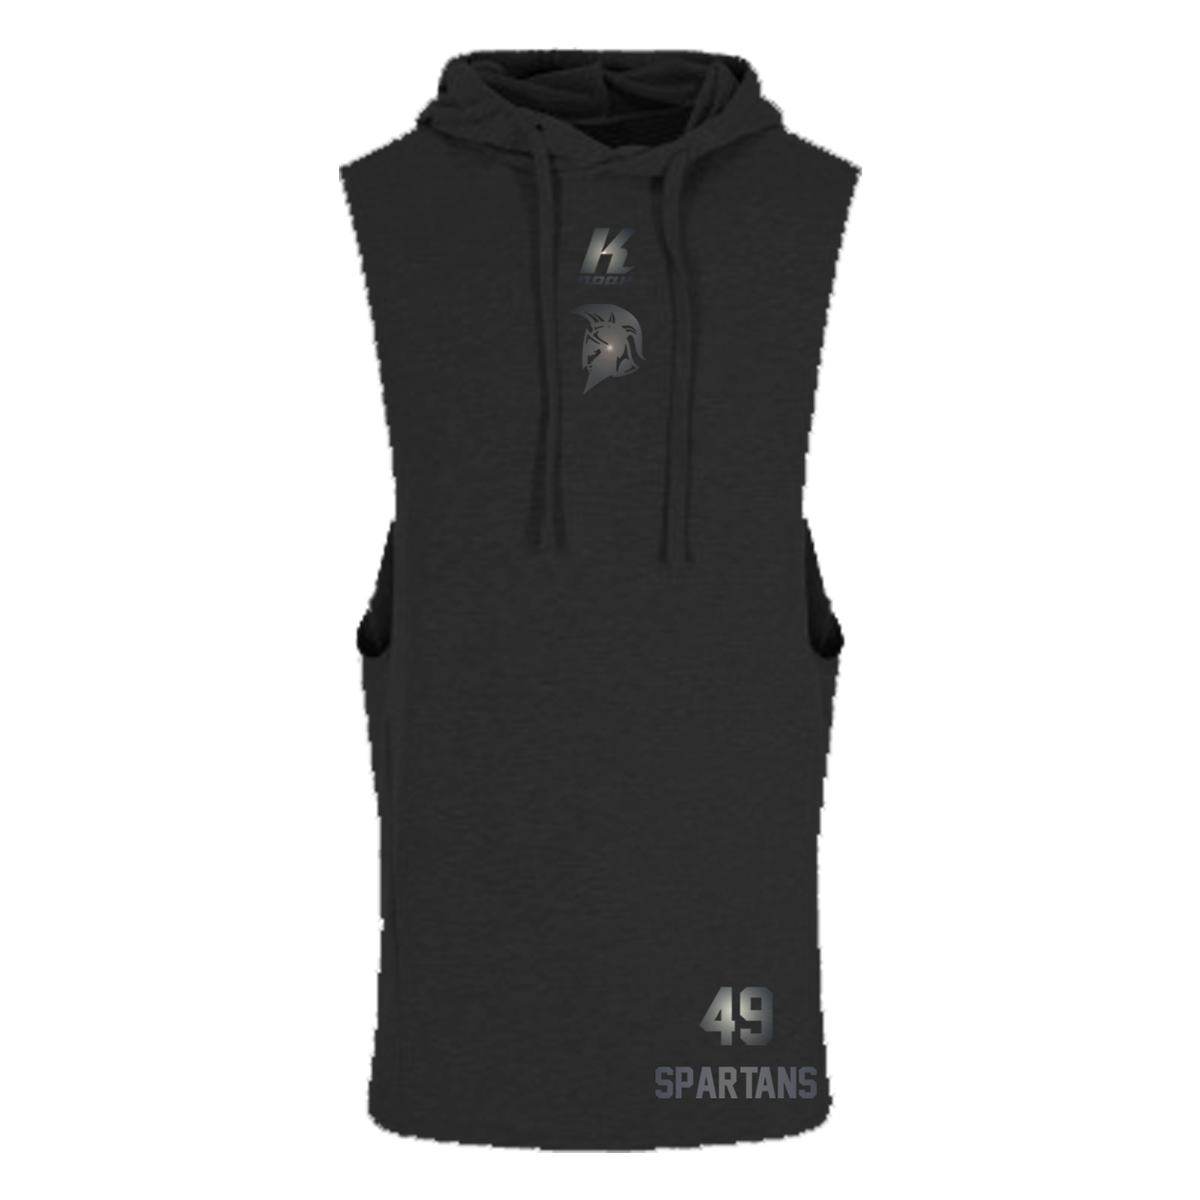 Spartans "Blackline" Sleeveless Muscle Hoodie JC053 with Playernumber or Initials